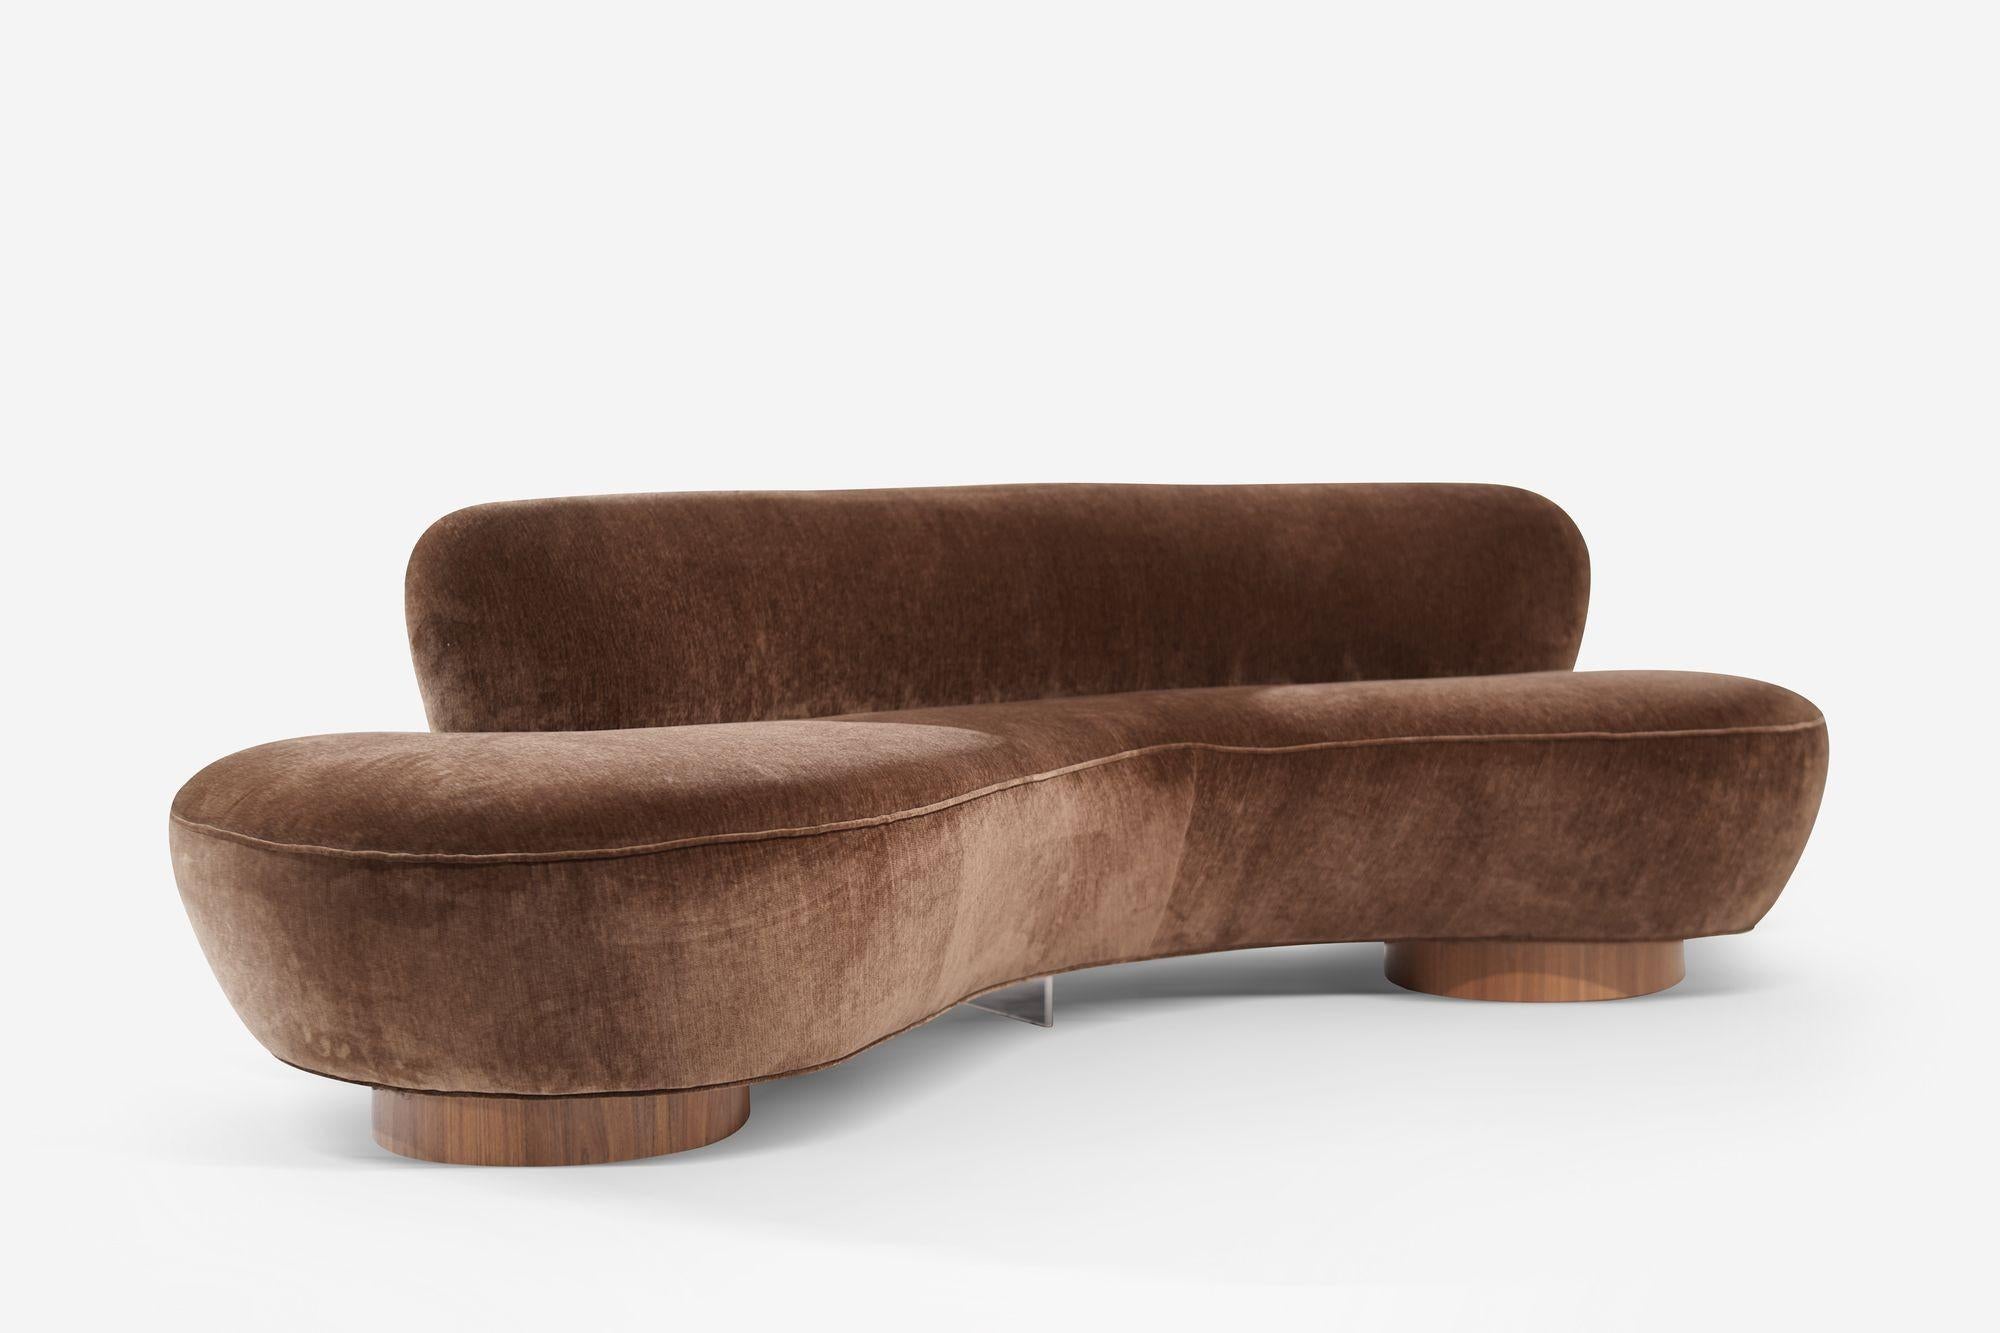 Cloud Sofa by Vladimir Kagan, a true emblem of 1970s design, meticulously restored to its original glory by Stamford Modern. This iconic piece exudes a sense of relaxed luxury, embodying Kagan's innovative approach to comfort and aesthetics. With